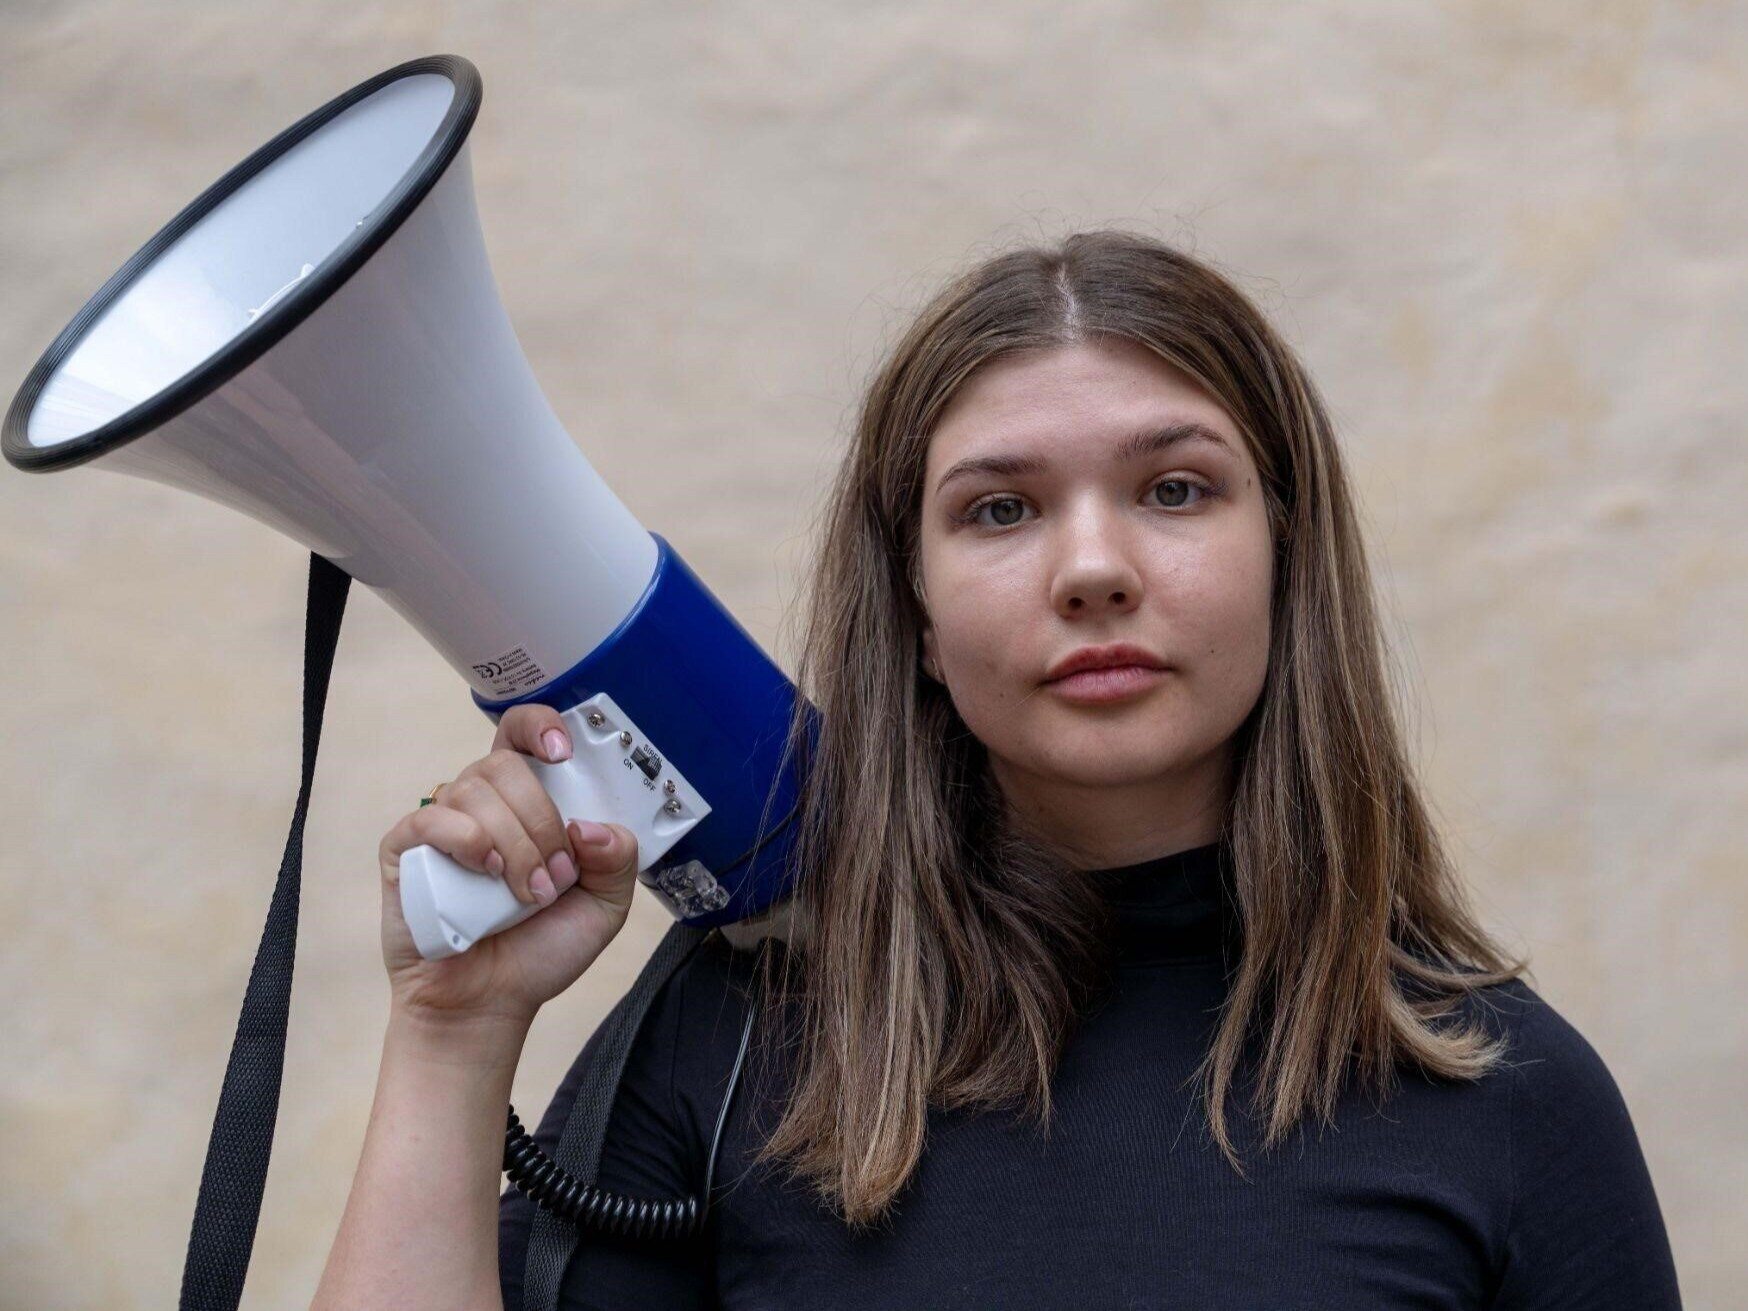 Julia is 22 years old and fighting for the atom.  "We are going to court with Greenpeace"